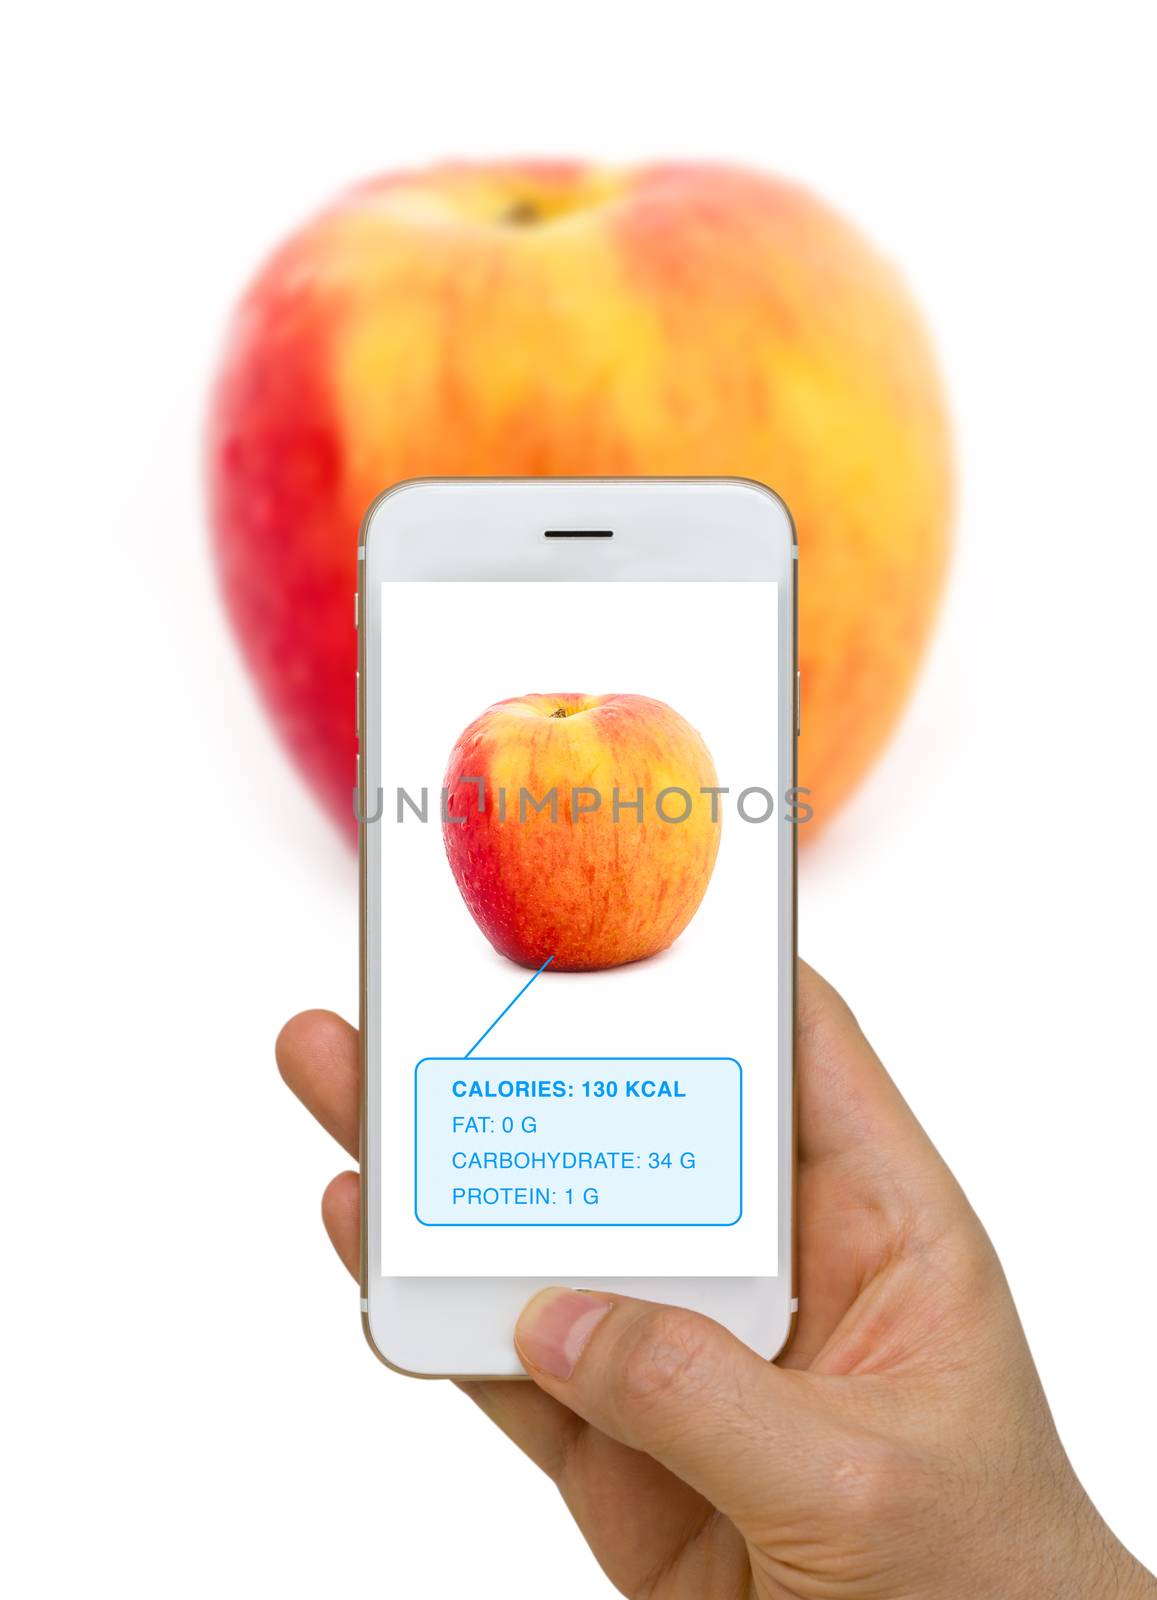 Smart device screen showing food, apple, nutrition information using augmented reality or AR technology.